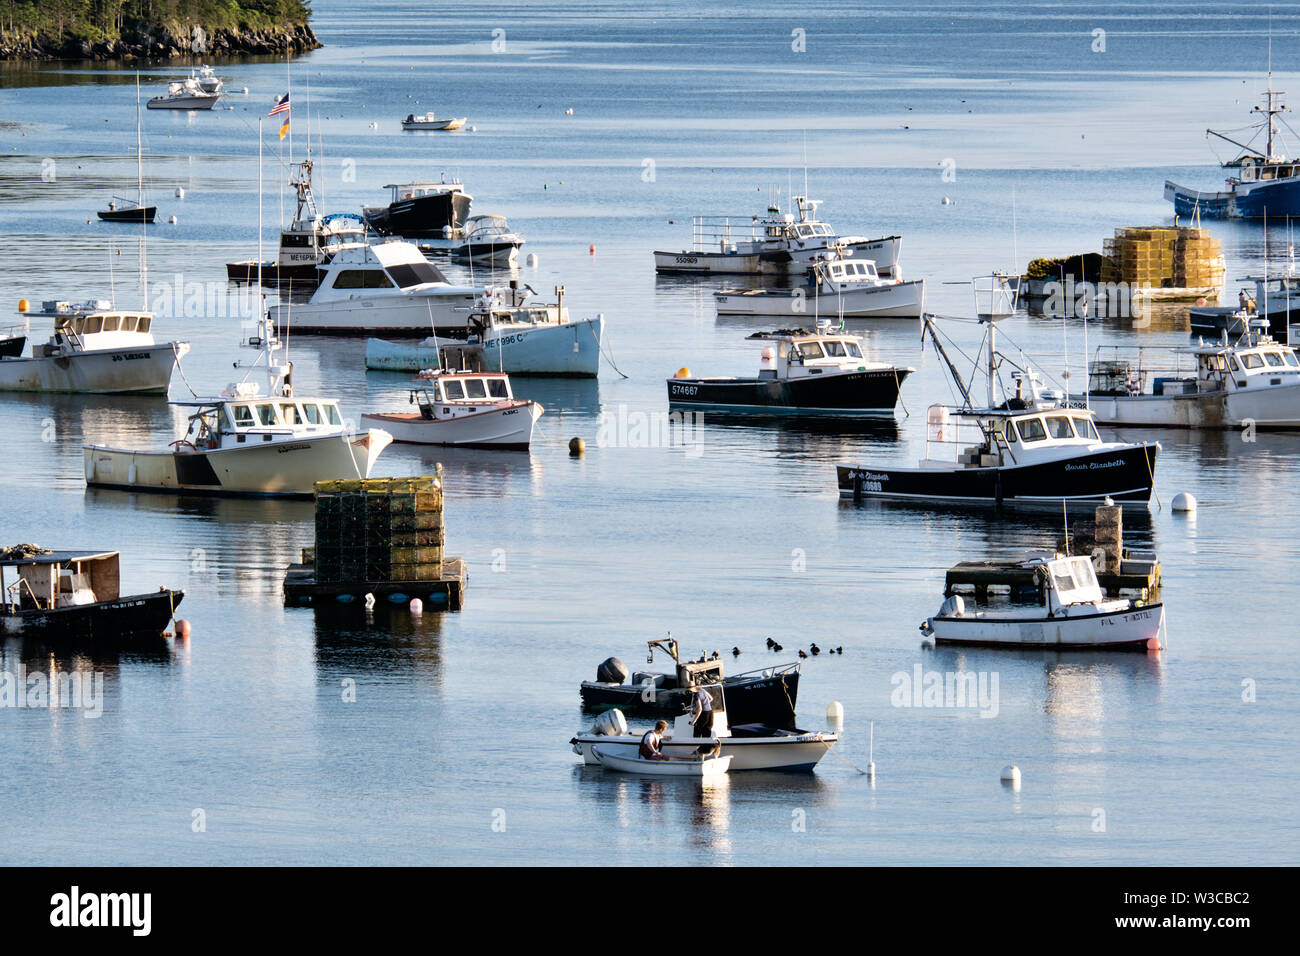 Lobster fishing boats moored in Mackerel Cove on Bailey Island on a summers day in Harpswell, Maine. Stock Photo